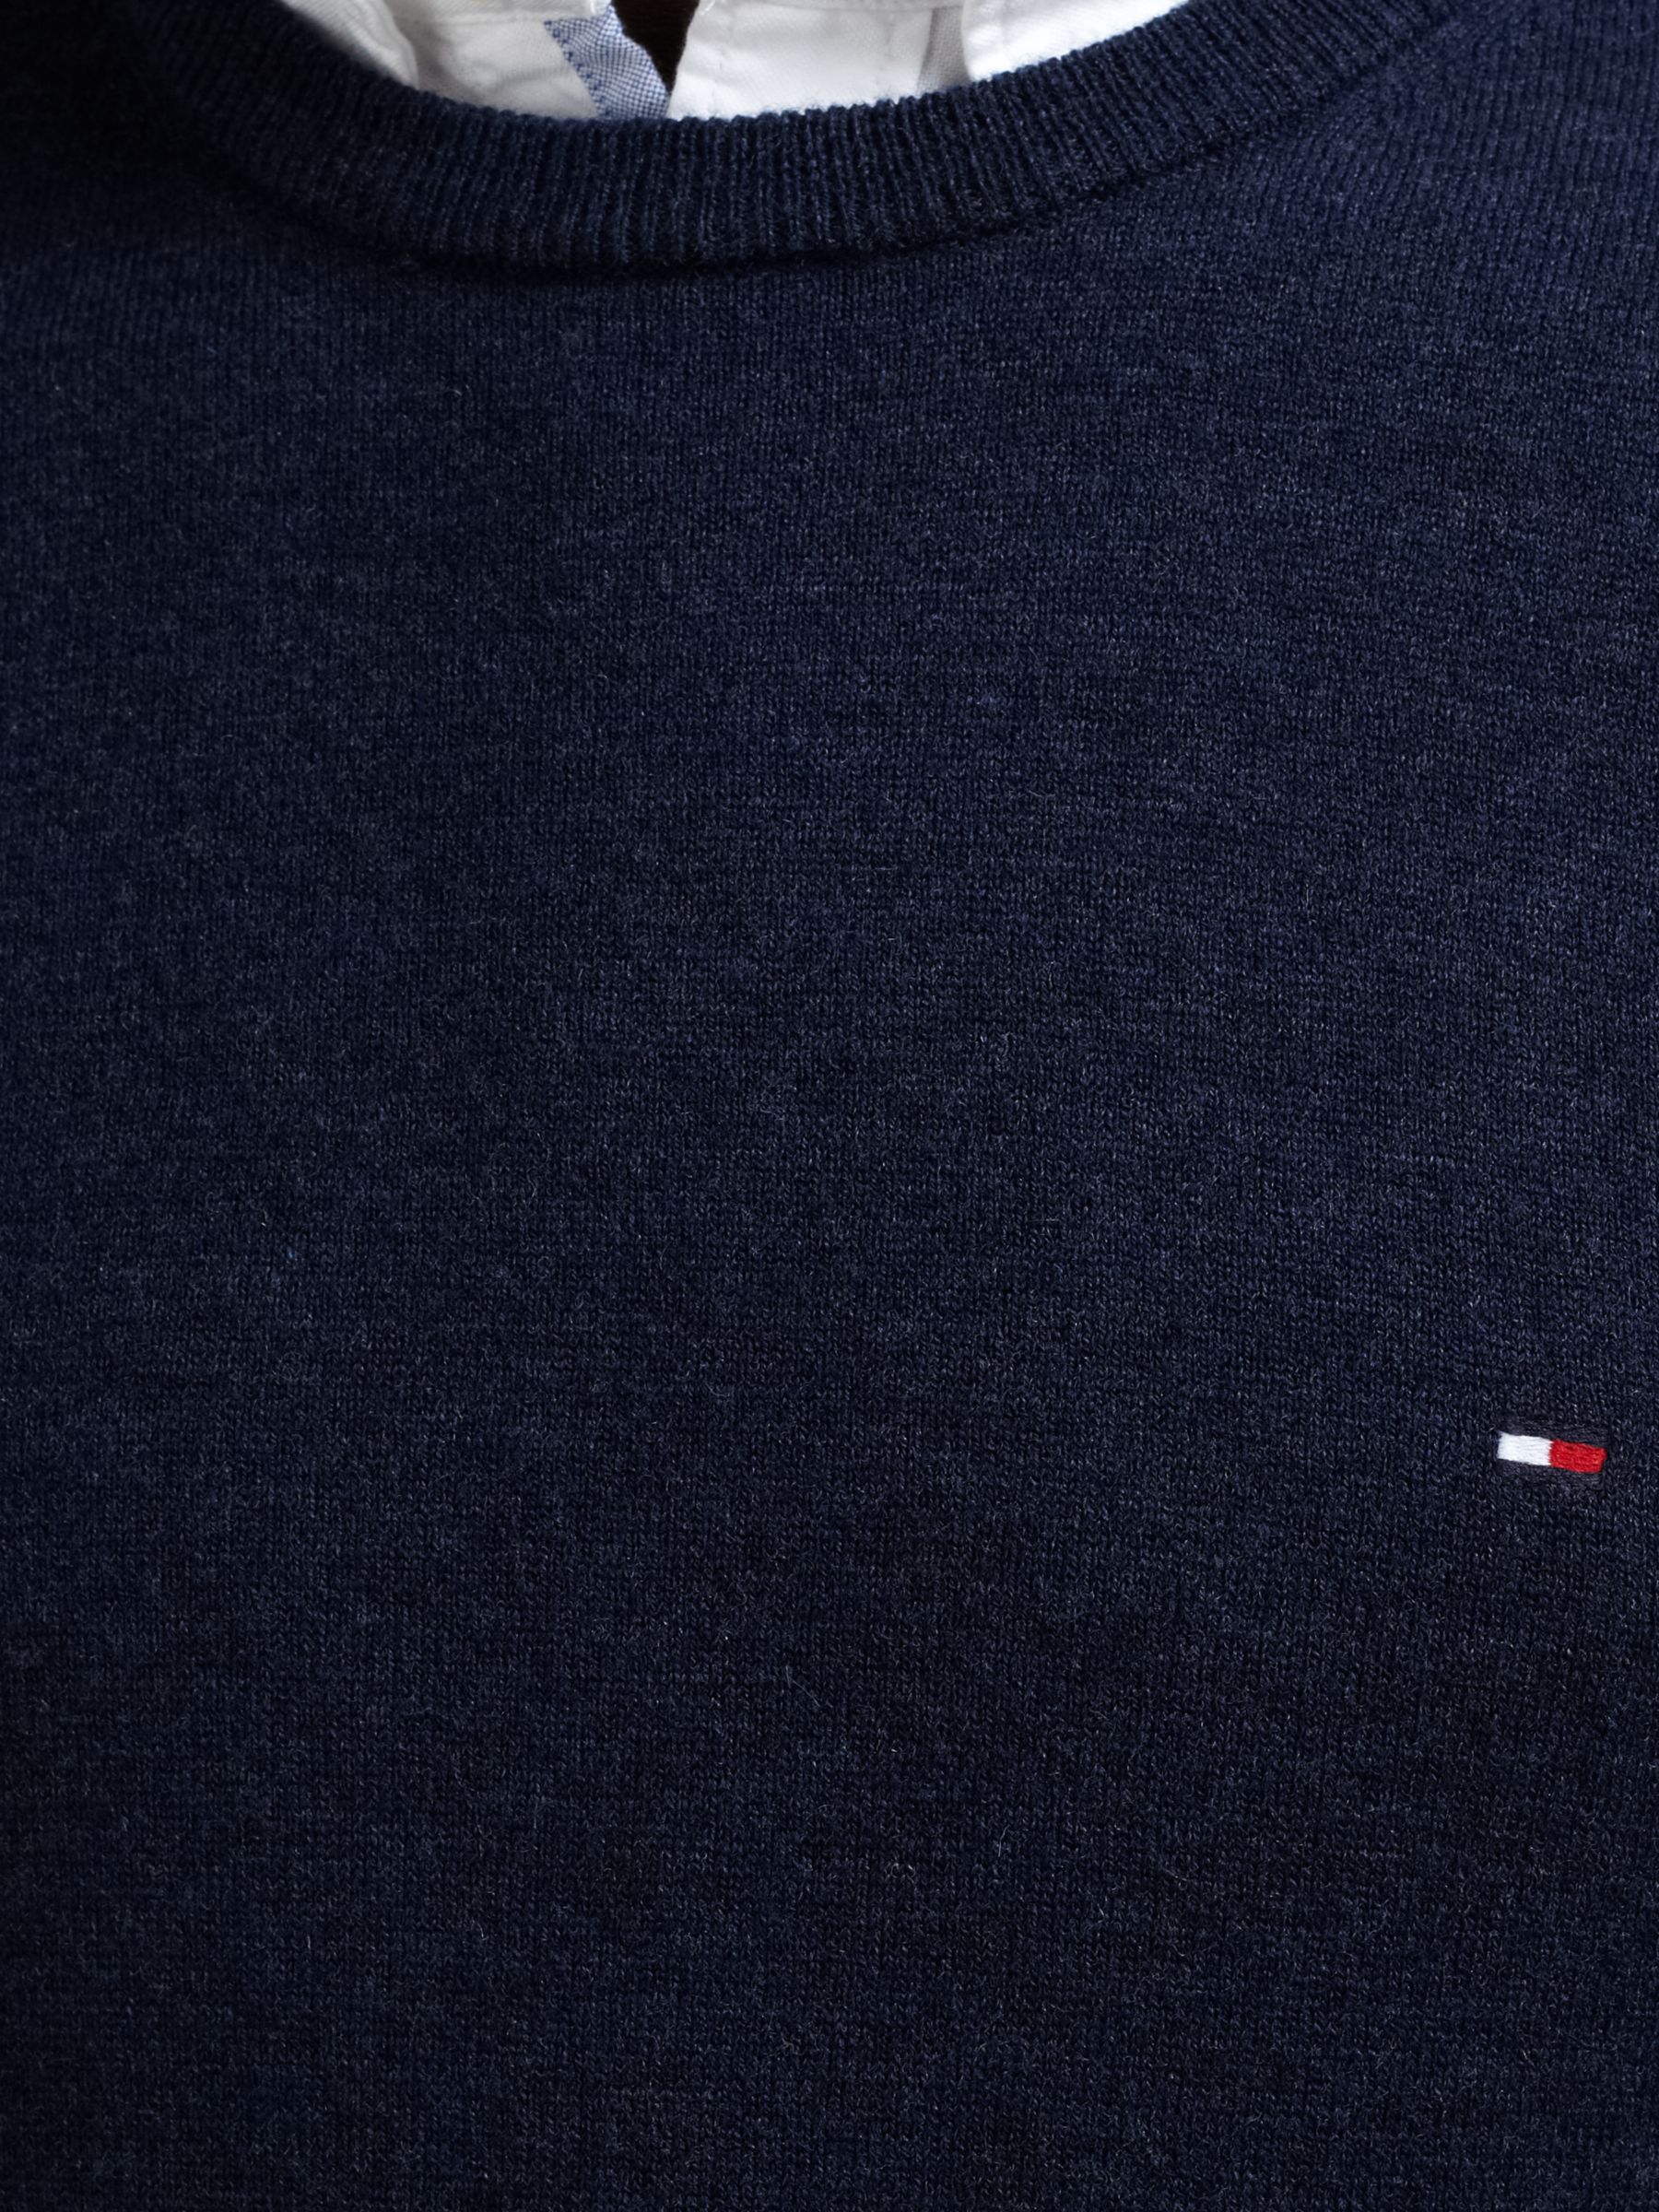 tommy hilfiger lambswool sweater